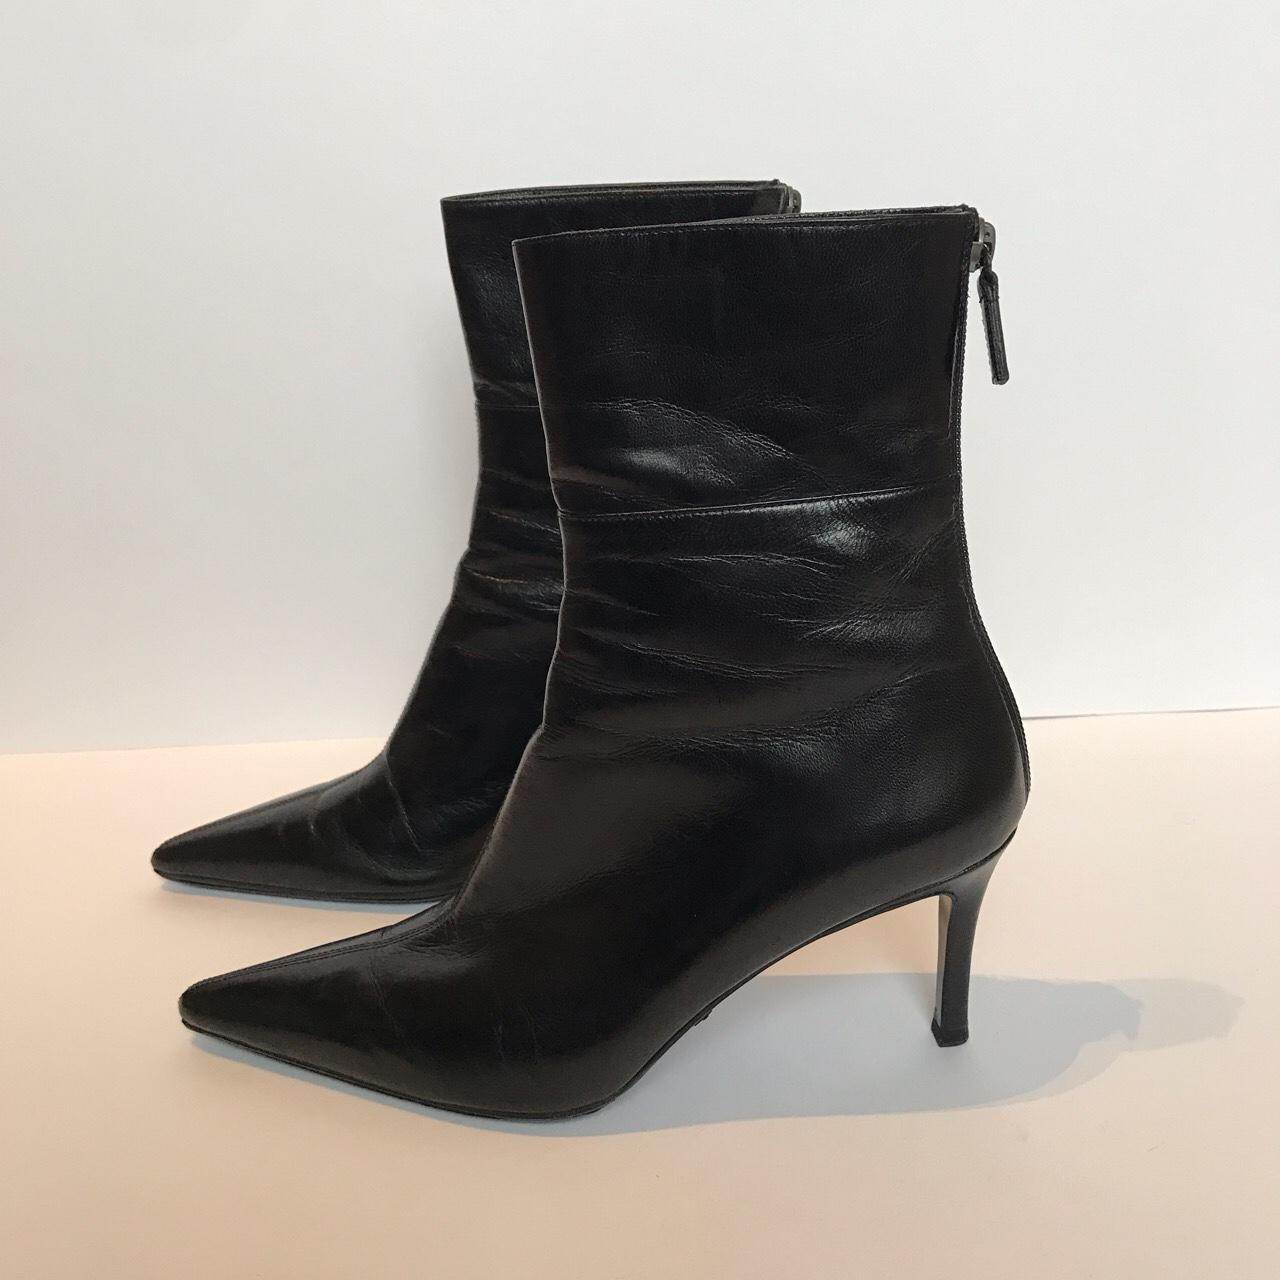 Gucci - Ankle Boots - Black smooth leather - Zip at... - Depop